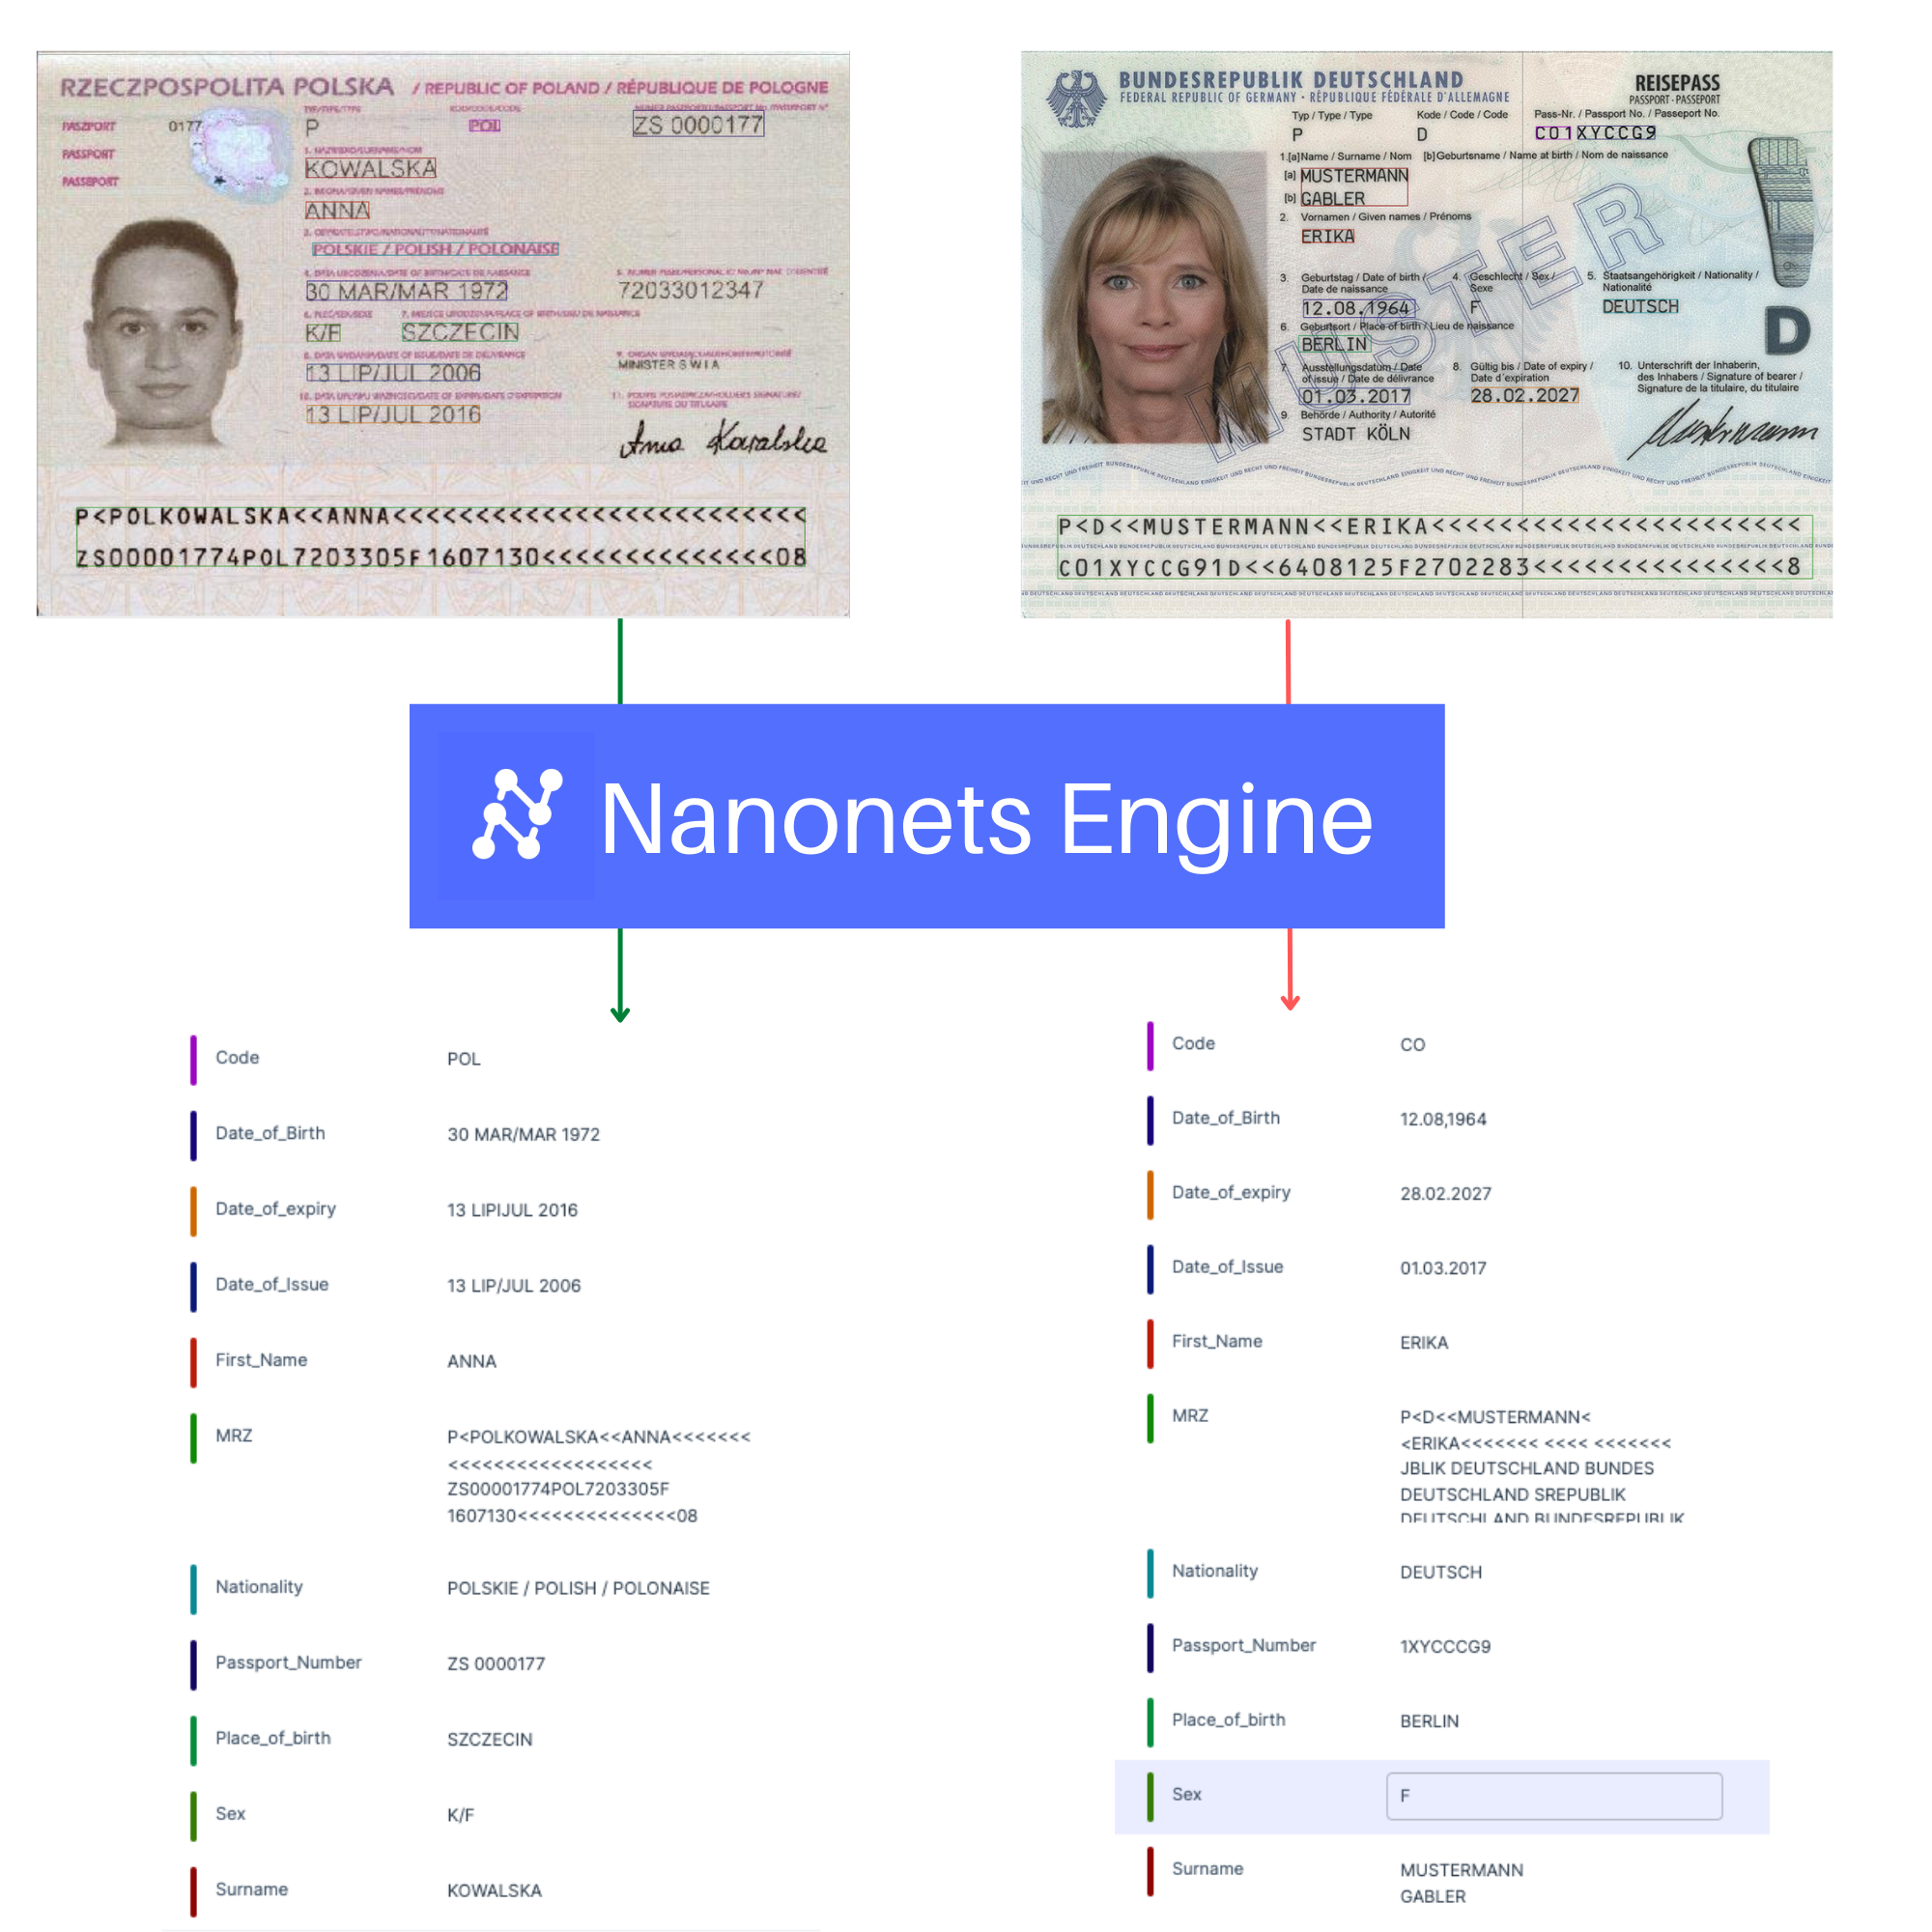 A single model is shown extracting data from passports in two languages